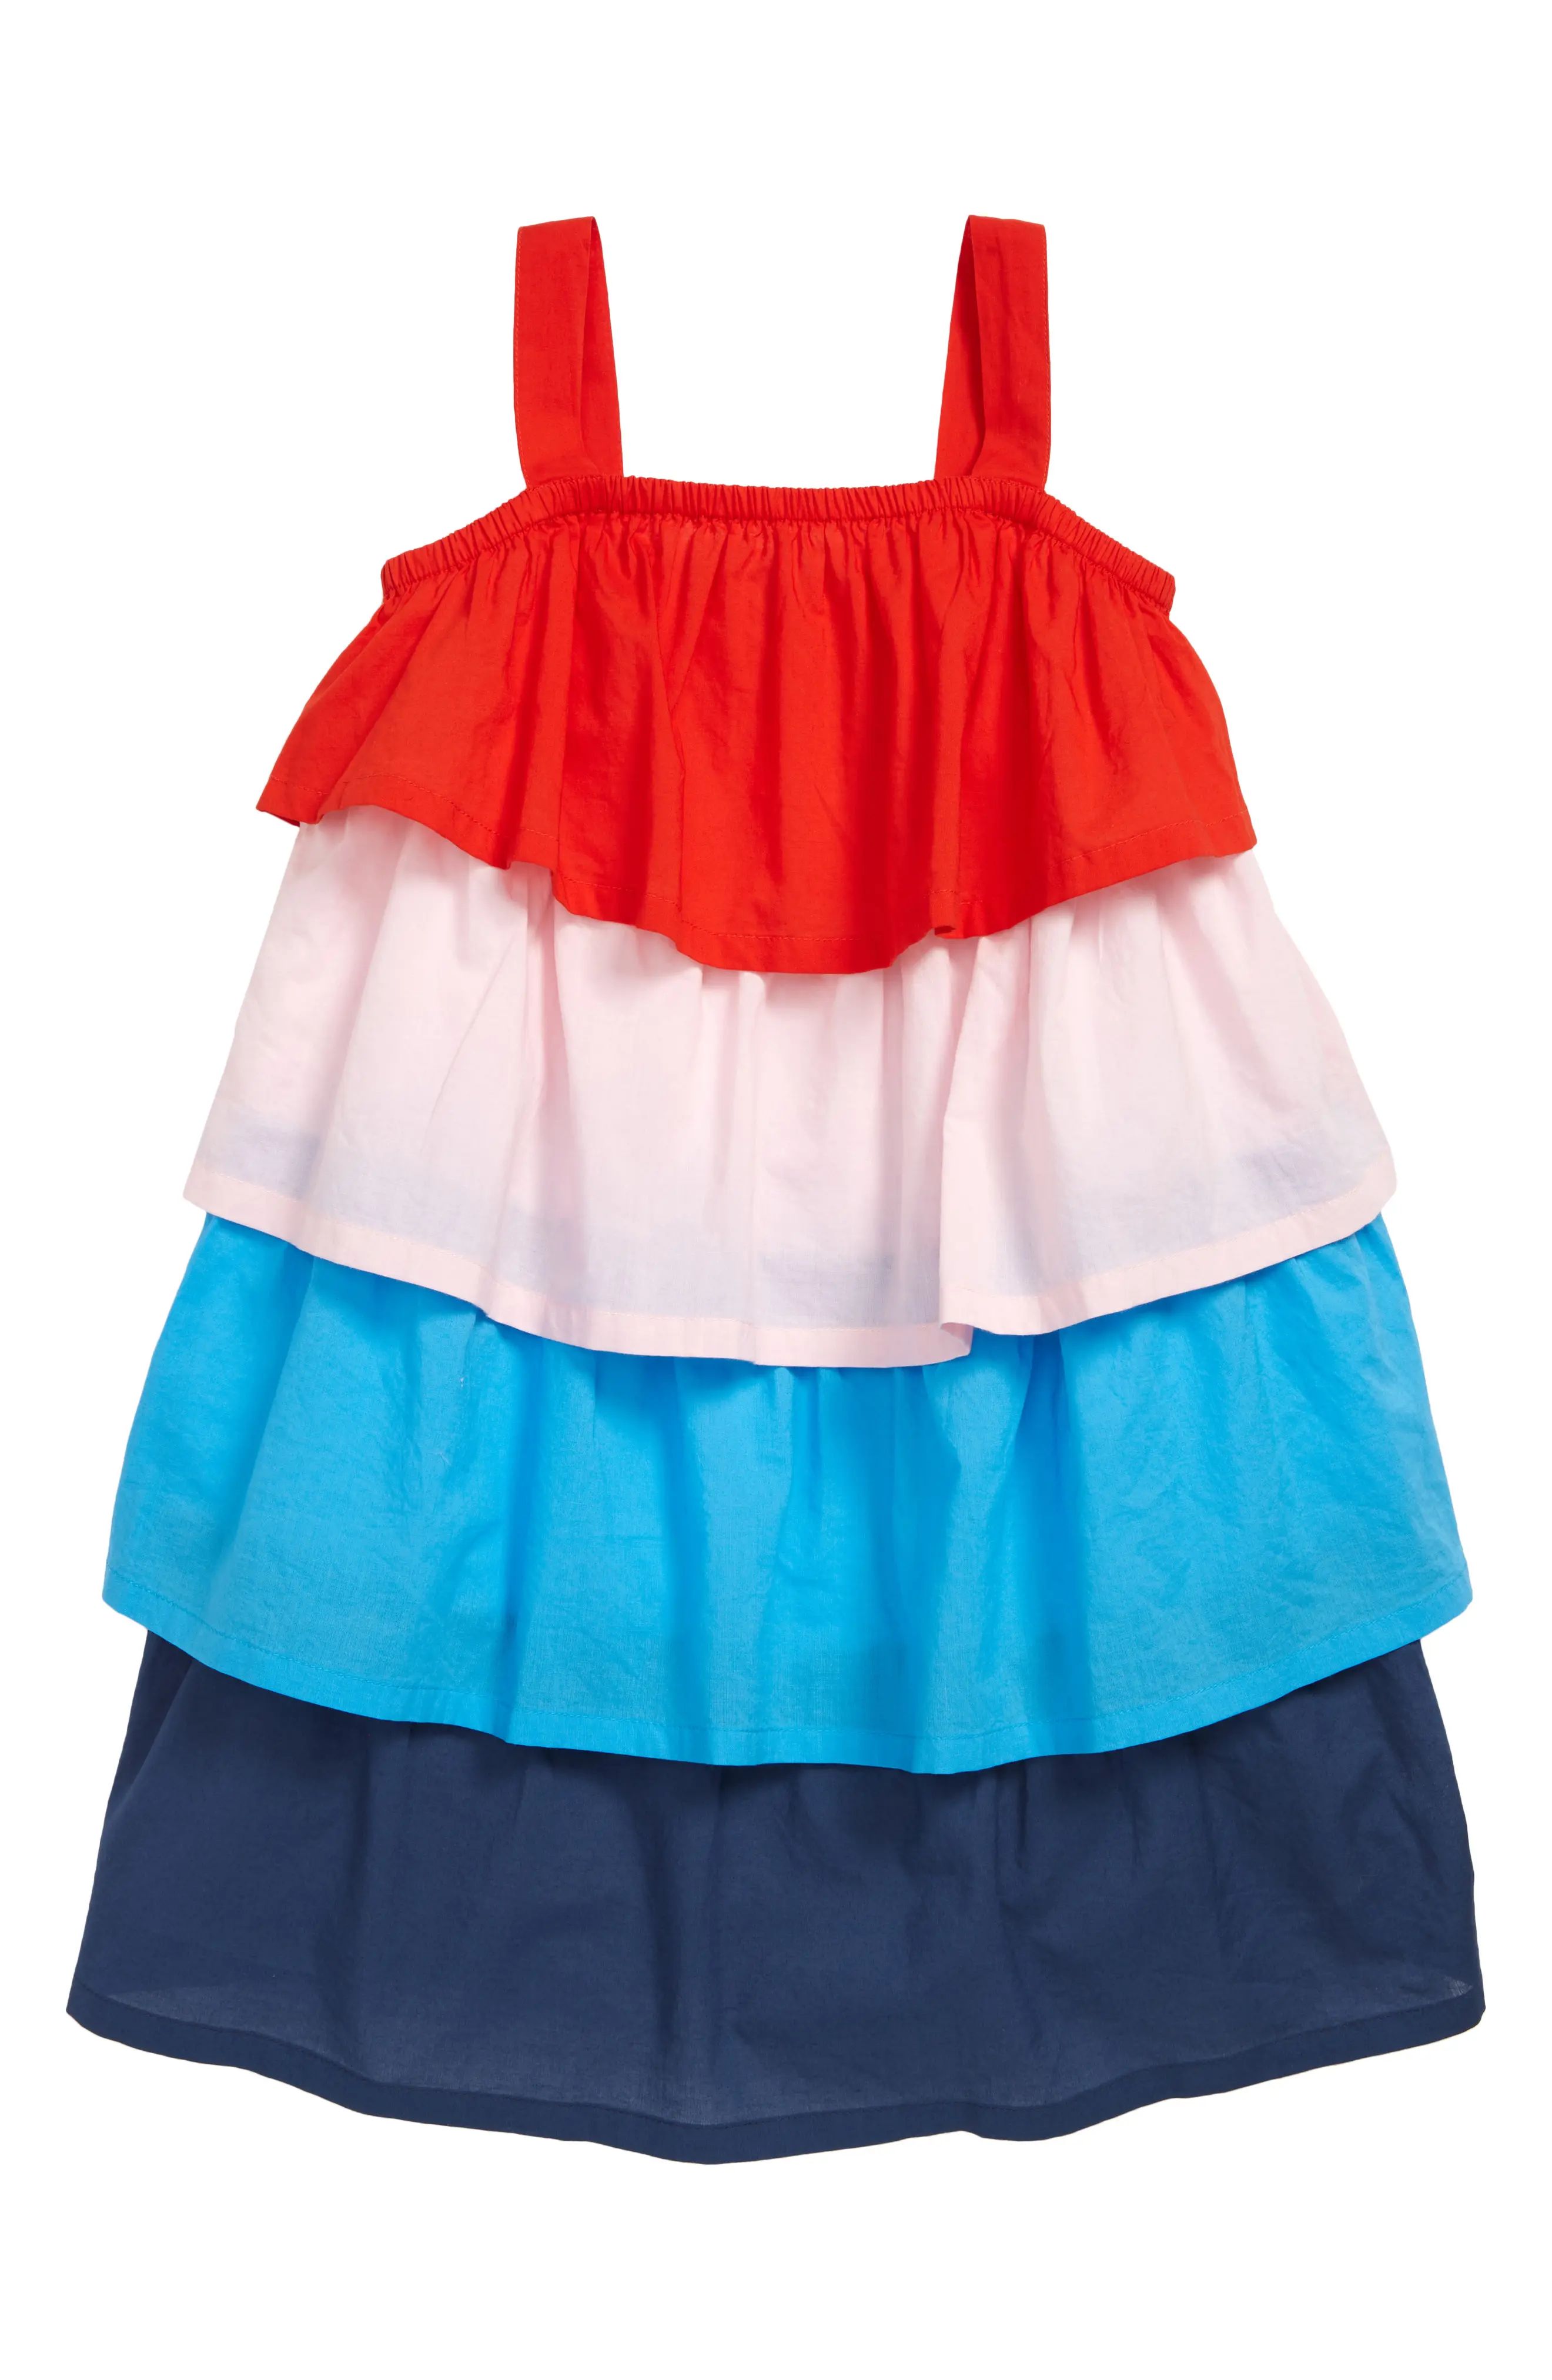 Tucker + Tate Kids' Tiered Dress in Red Fiery Multi Block at Nordstrom, Size 6 Us | Nordstrom